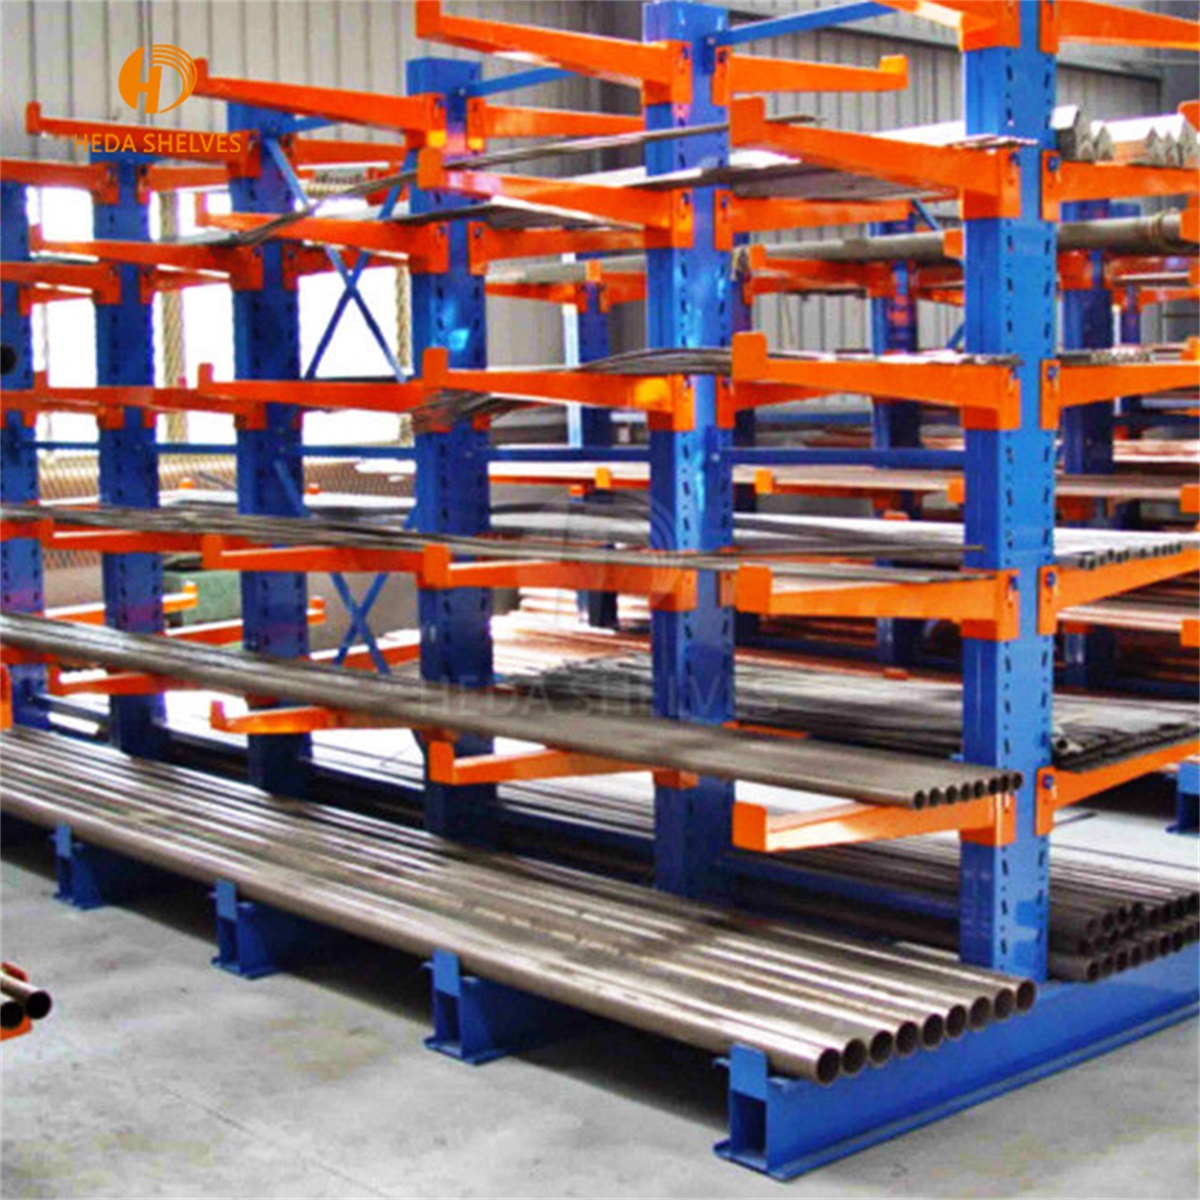 cantilever racking,heavy duty cantilever rack,tube racking,cantilever rack manufacturers,tube storage,warehouse storage,pallet rack(1